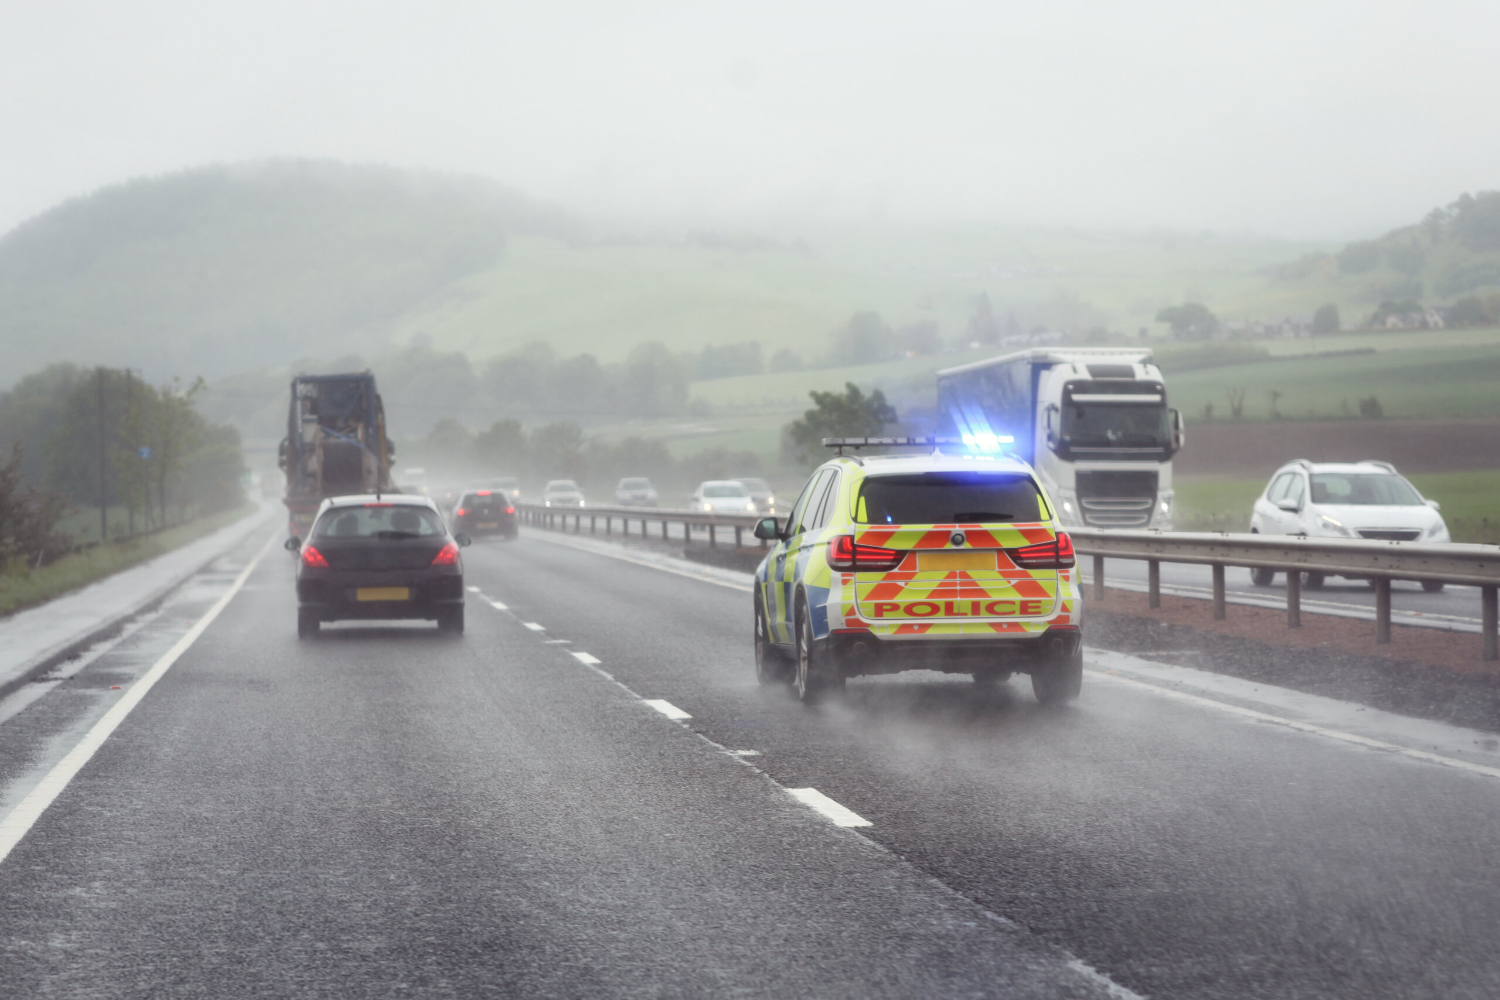 Police driving in the rain on a dual carriage way